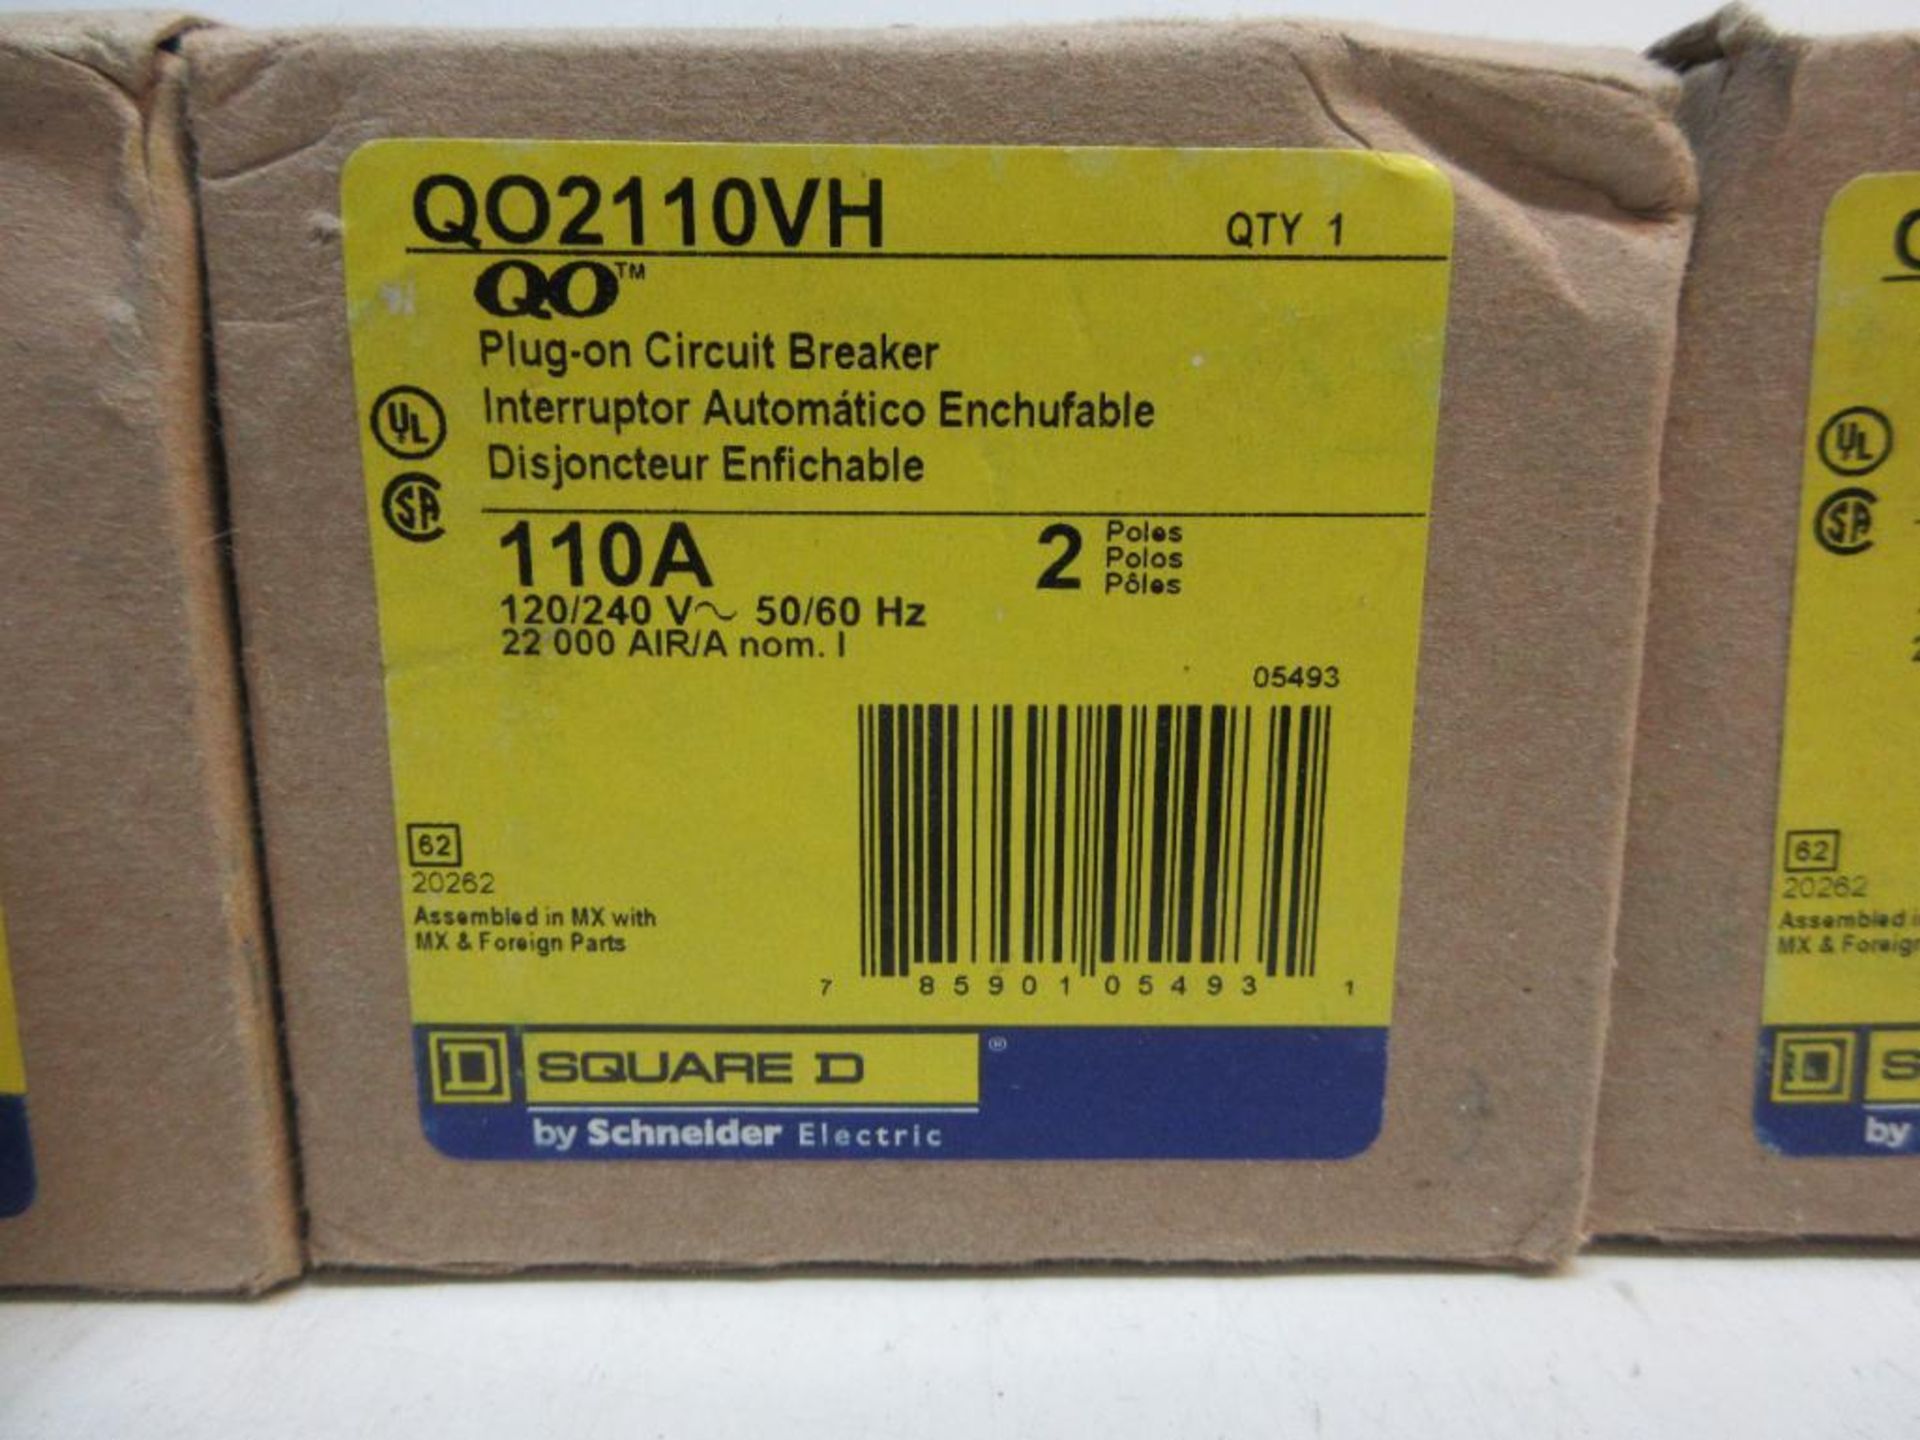 (20) SQUARE D QO2110VH PLUG-ON CIRCUIT BREAKER 110A 2 POLE NEW (THIS LOT IS FOB CAMARILLO CA) - (The - Image 2 of 2